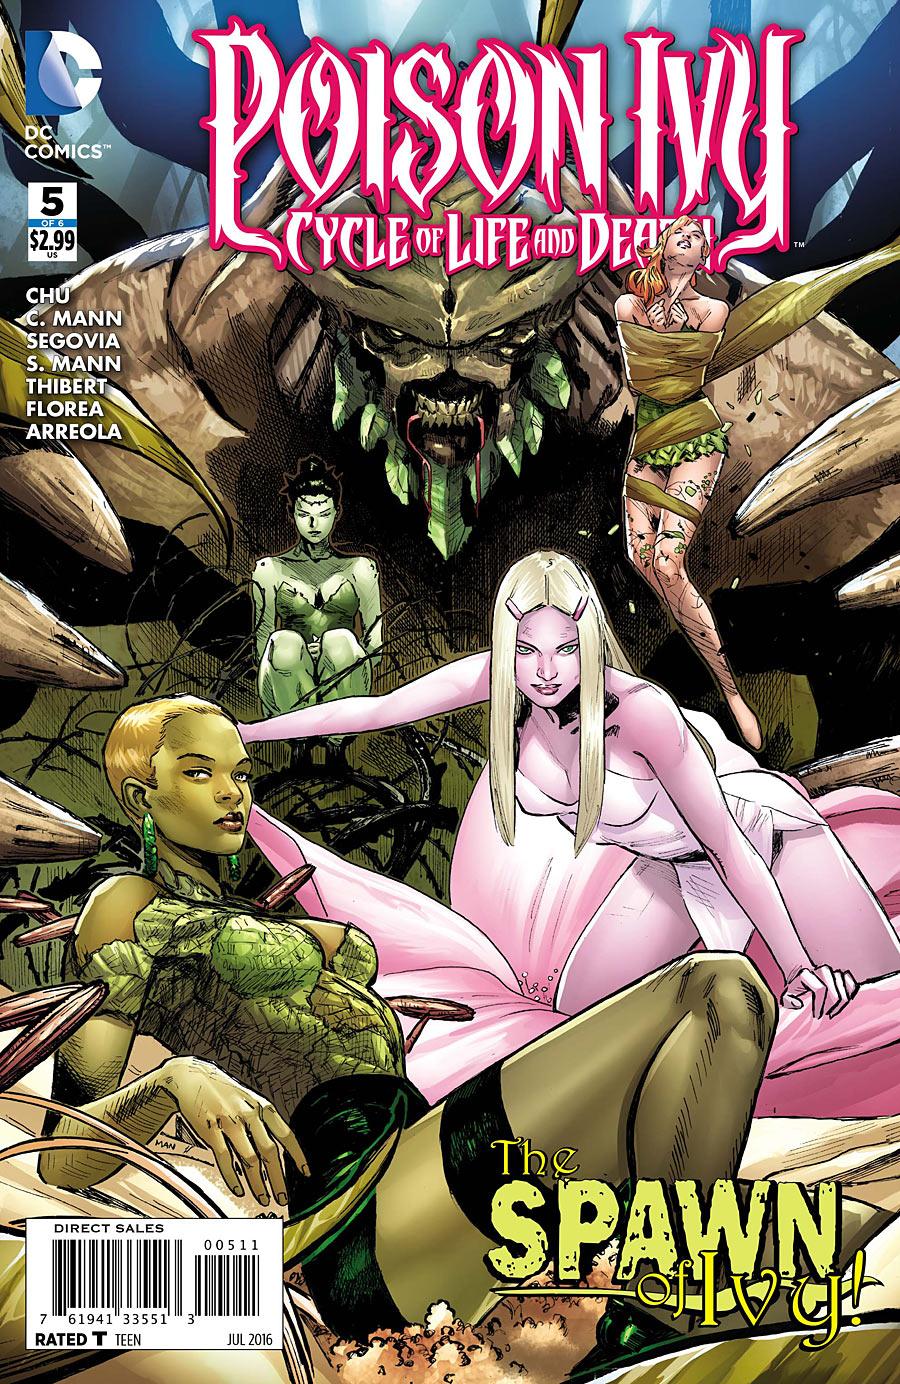 Poison Ivy: Cycle of Life and Death Vol. 1 #5